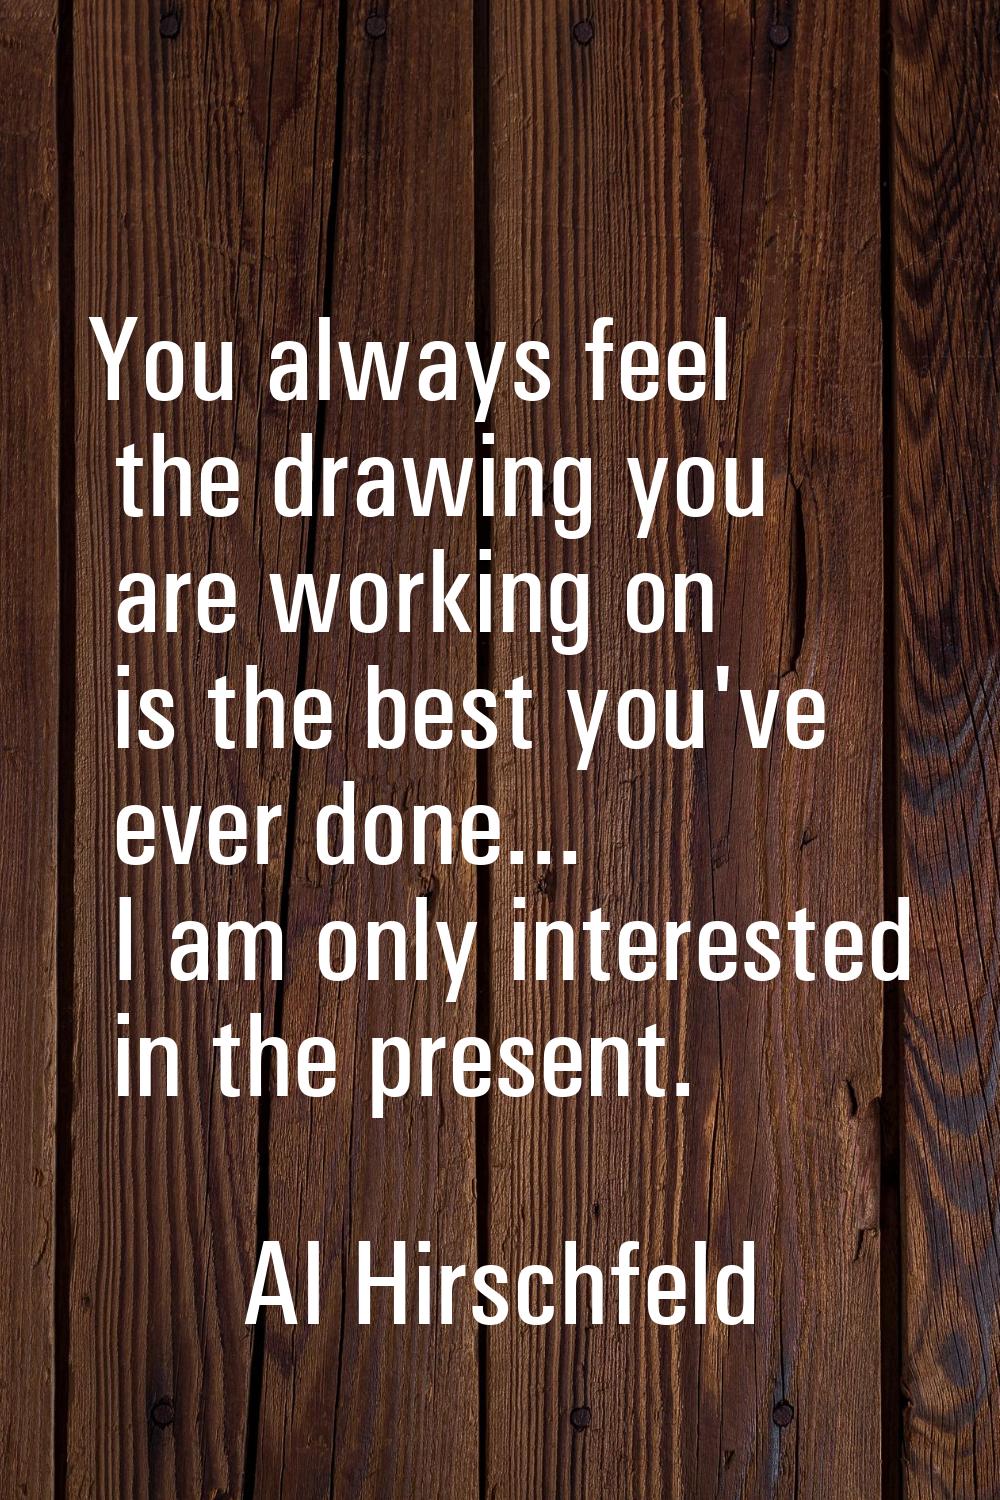 You always feel the drawing you are working on is the best you've ever done... I am only interested